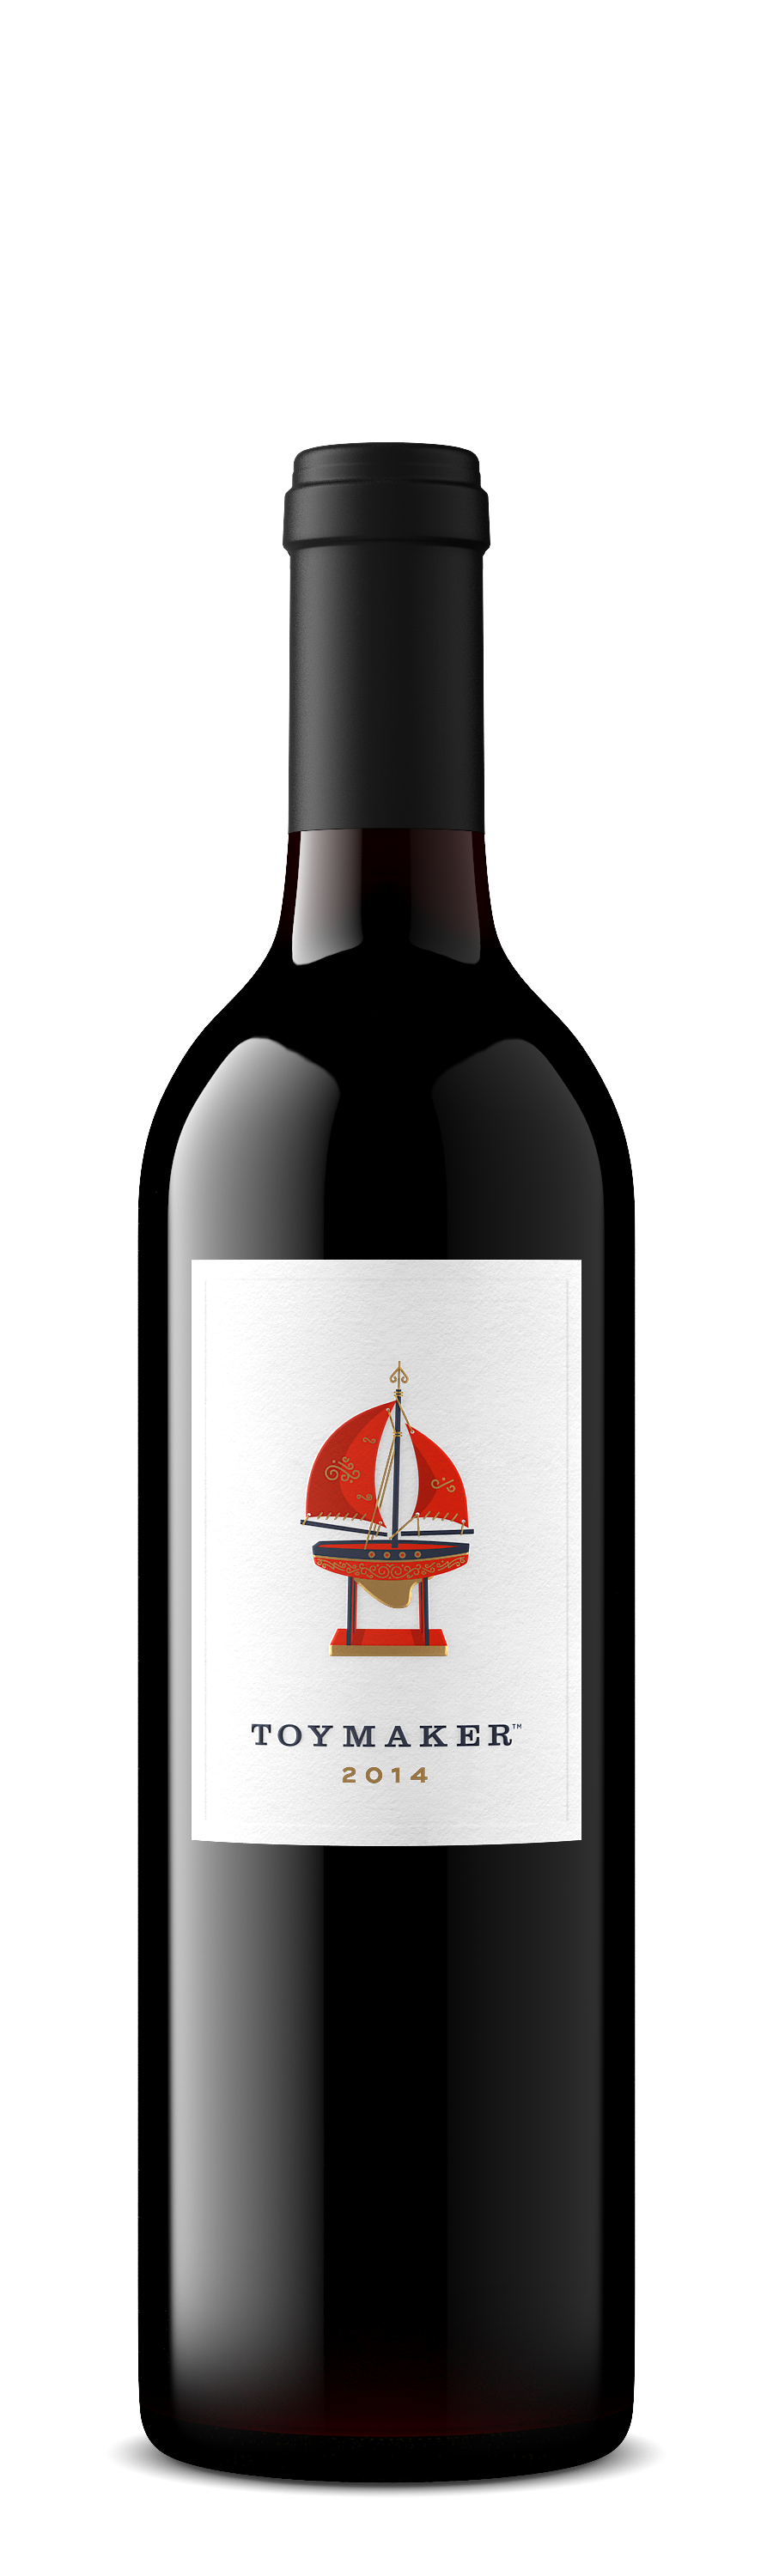 2014 ToyMaker Cellars Cabernet Sauvignon, Red Wine, Napa Valley, California, made by winemaker Martha McClellan of Sloan Estate, Checkerboard Vineyards, Levy & McClellan, and formerly of Harlan Estate. Best Napa Valley Grand Cru red wines.